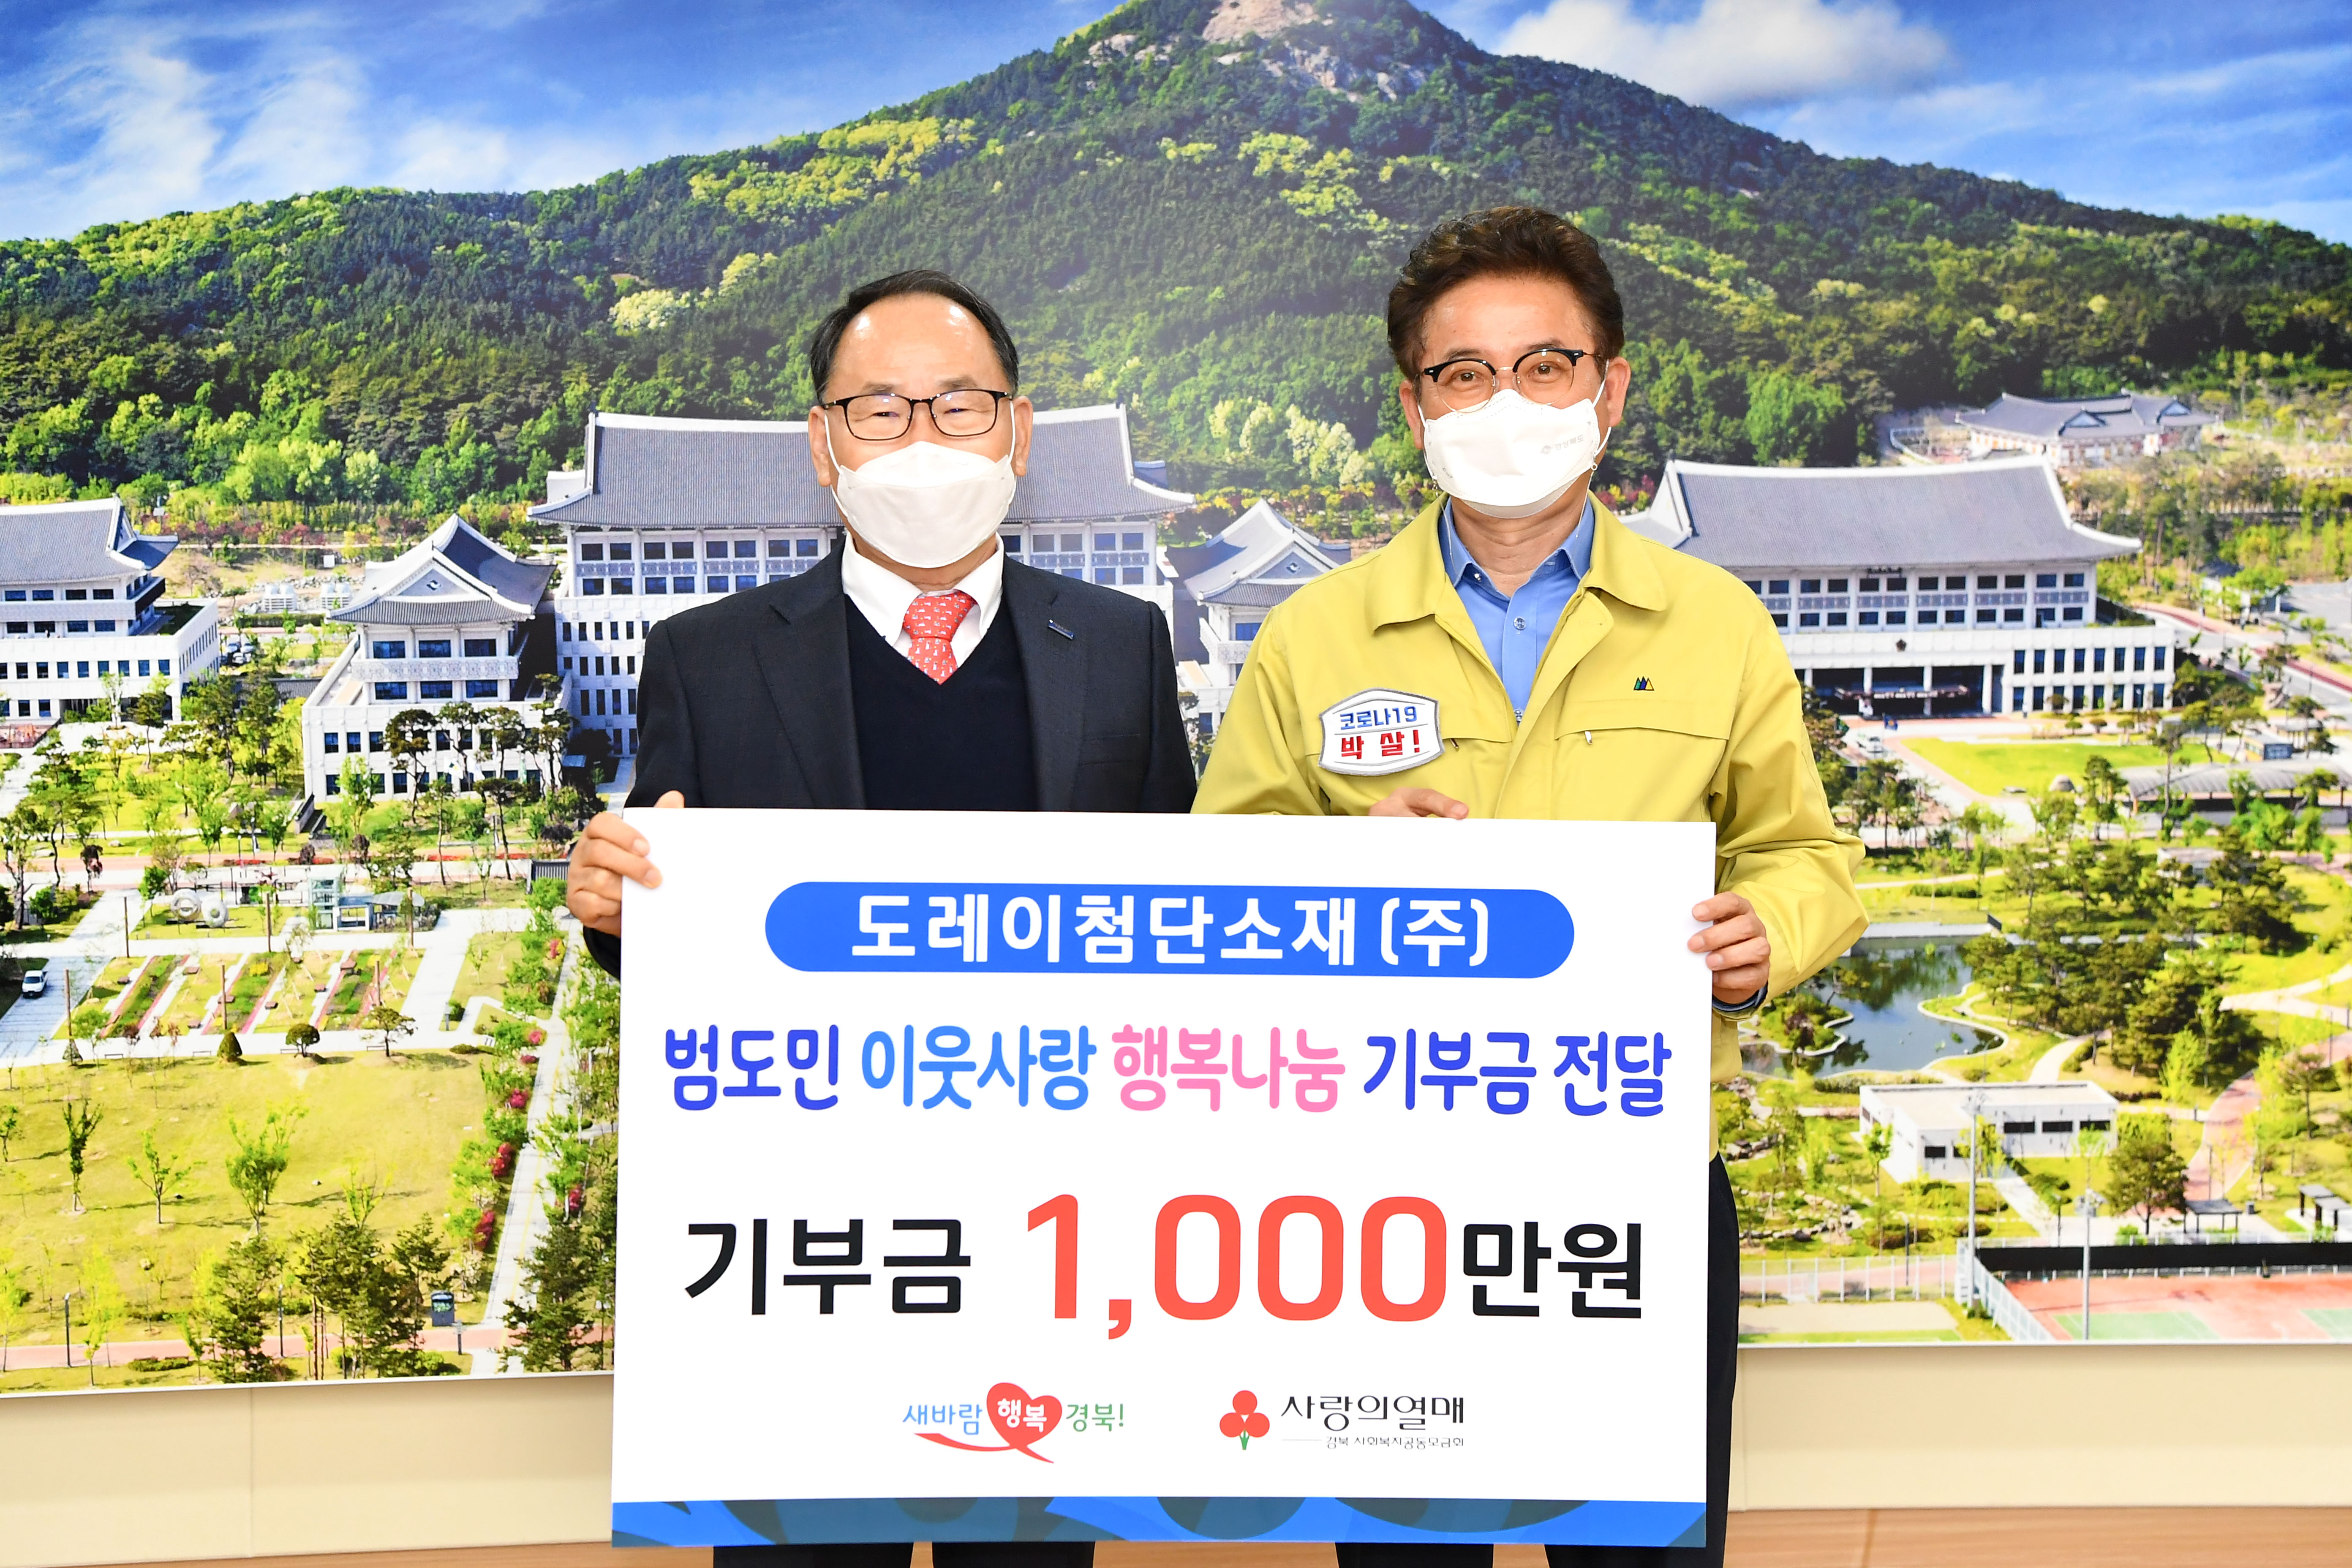 TAK donates 10 million KRW to Gyeongsangbuk-do as part of the Love & Happiness Sharing campaign